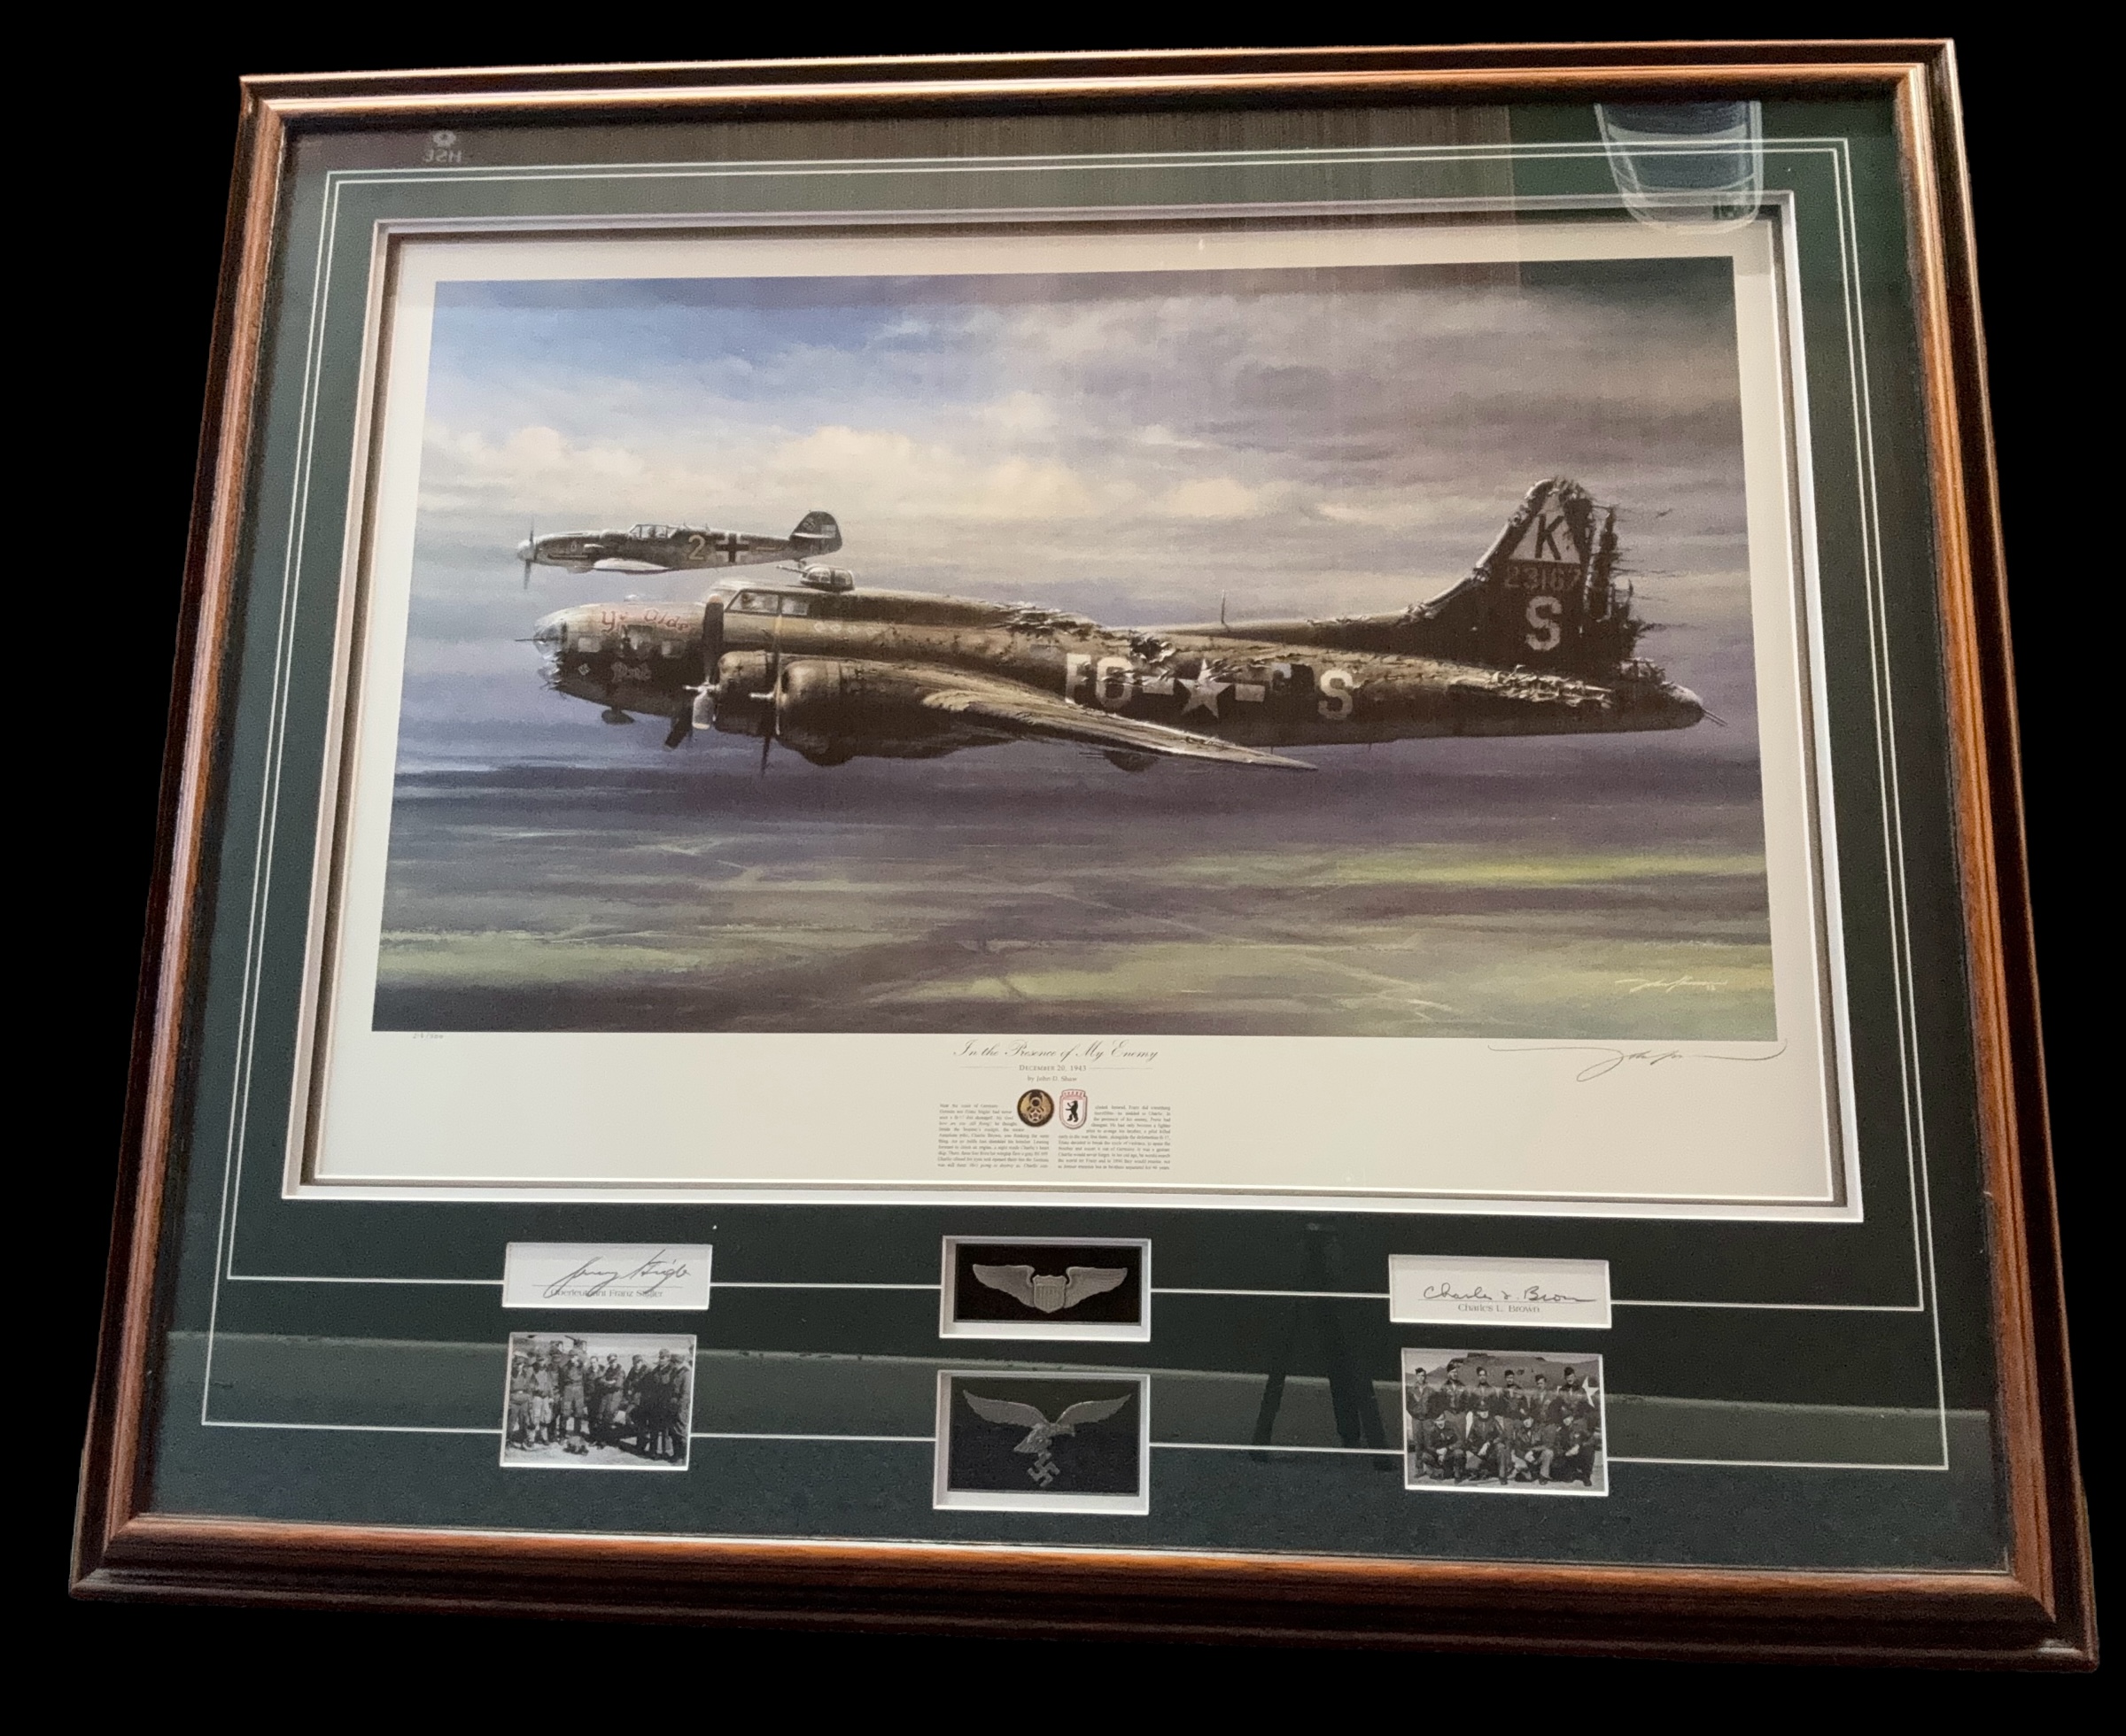 WW 2 Print titled IN THE PRESENCE OF MY ENEMY - FRAMED COLLECTOR'S PIECE by John D Limited 218/